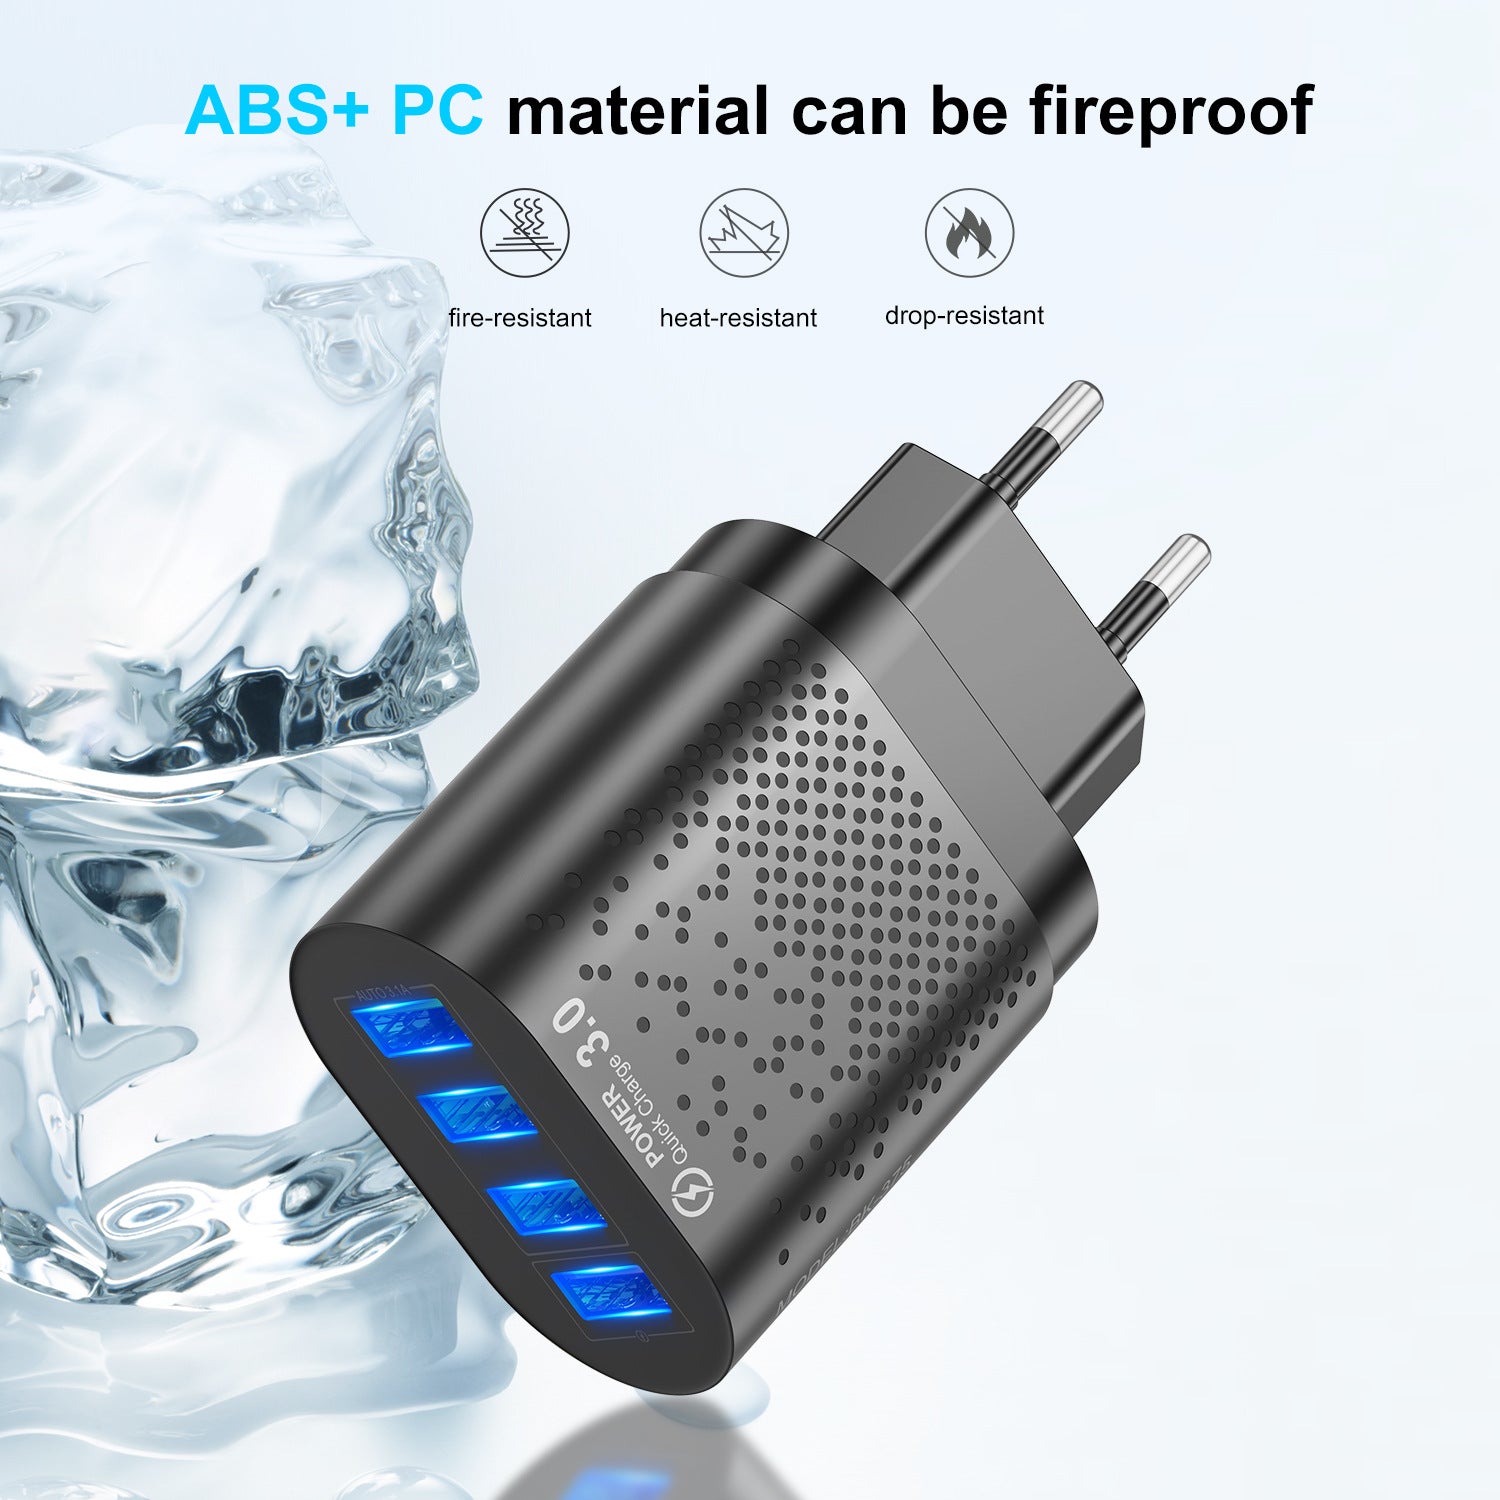 3a 4 Ports Hub Usb  Charger Plug Adapter Fireproof Pc Material Quick Charge Multifunctional Universal Mobile Phone Charger black EU plug ZopiStyle